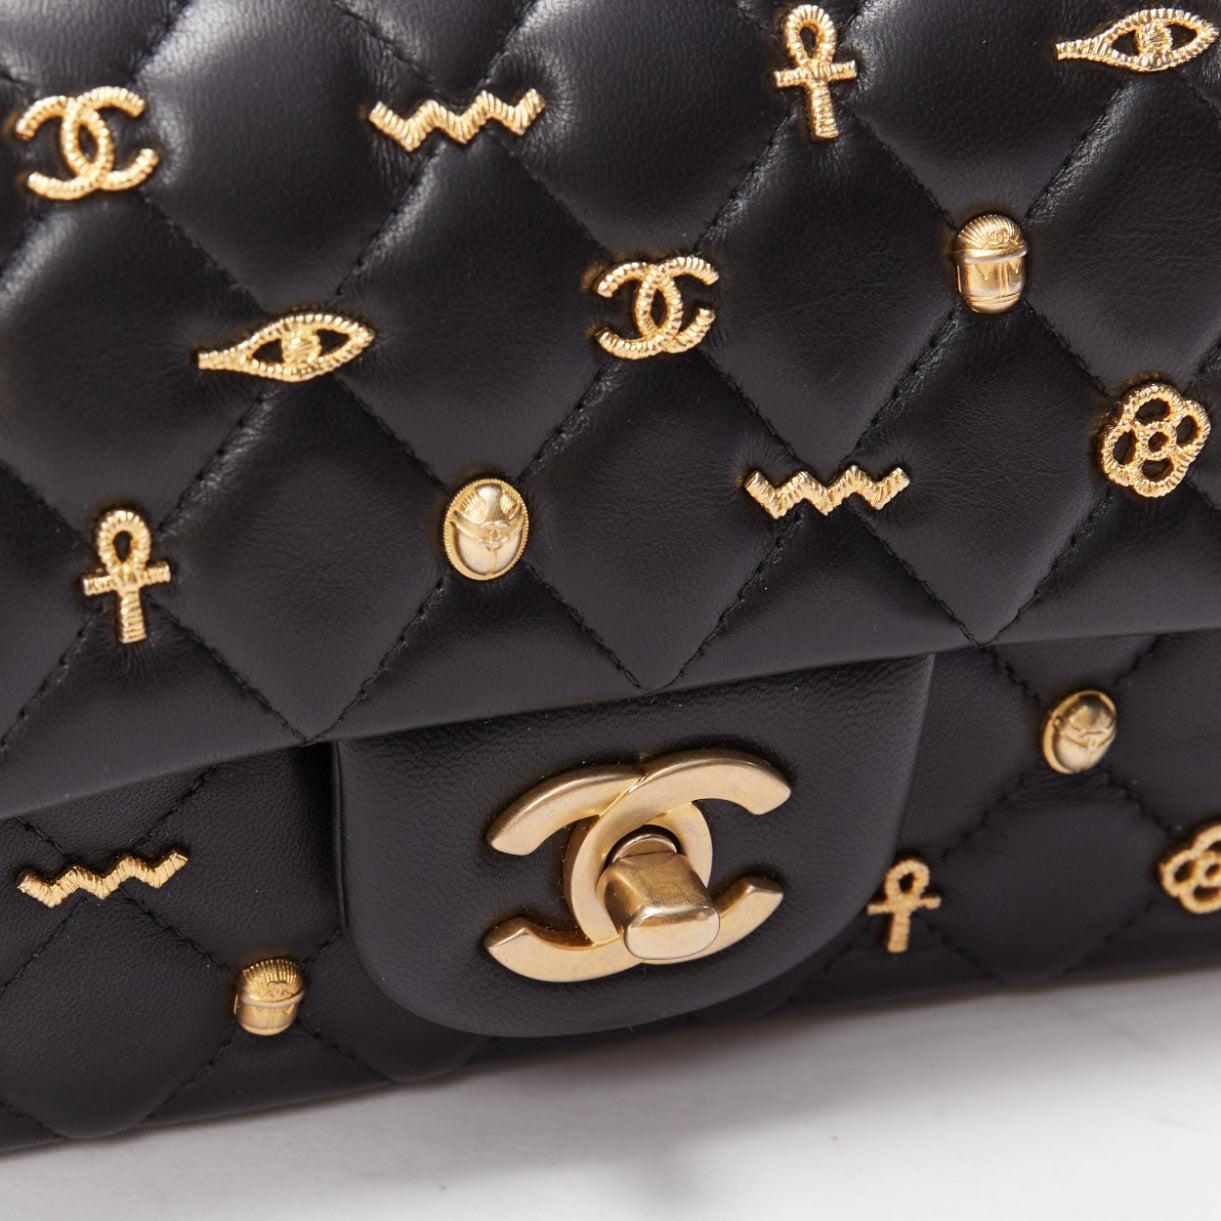 rare CHANEL 2019 Egyptian Amulet Limited Lucky Charms CC black leather flap bag 3